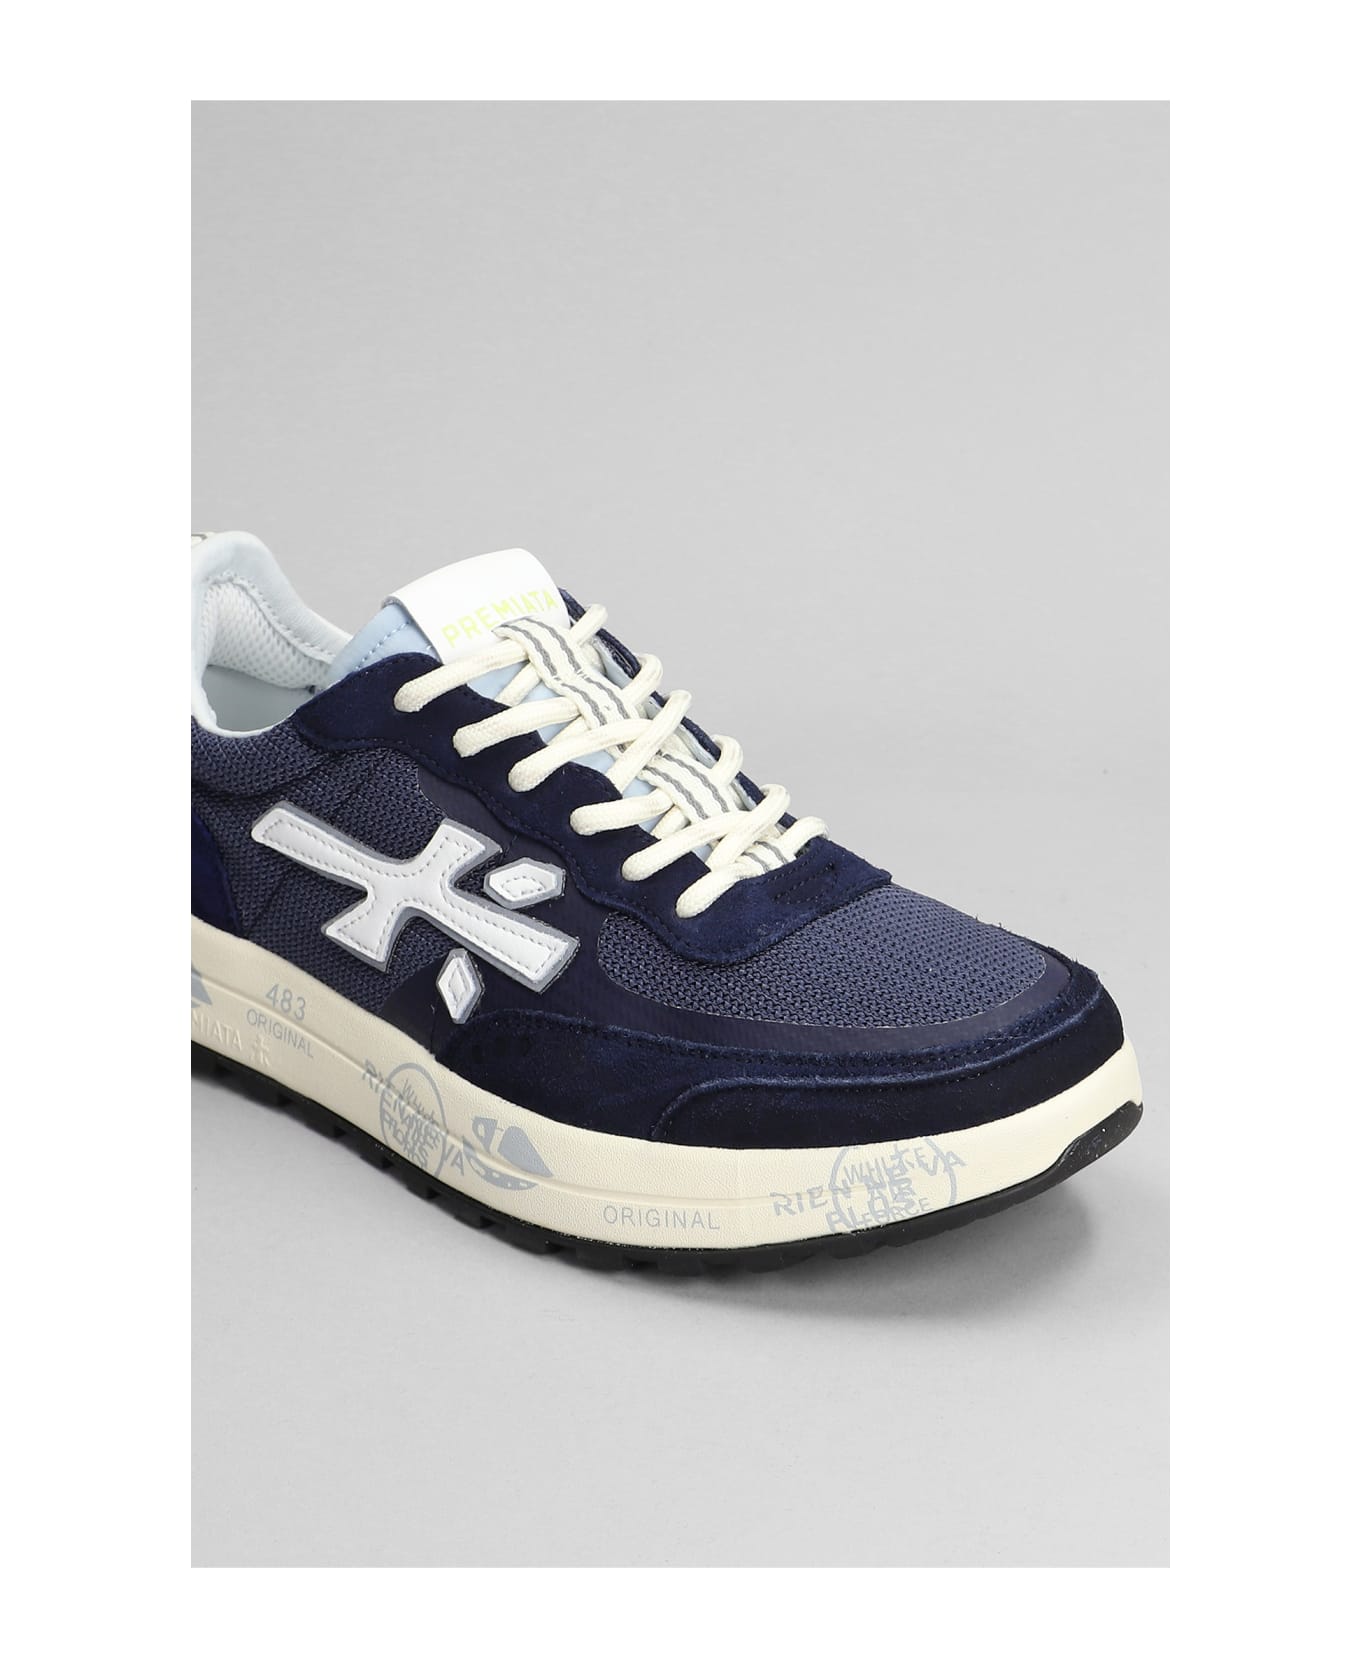 Premiata Nous Sneakers In Blue Suede And Fabric - blue